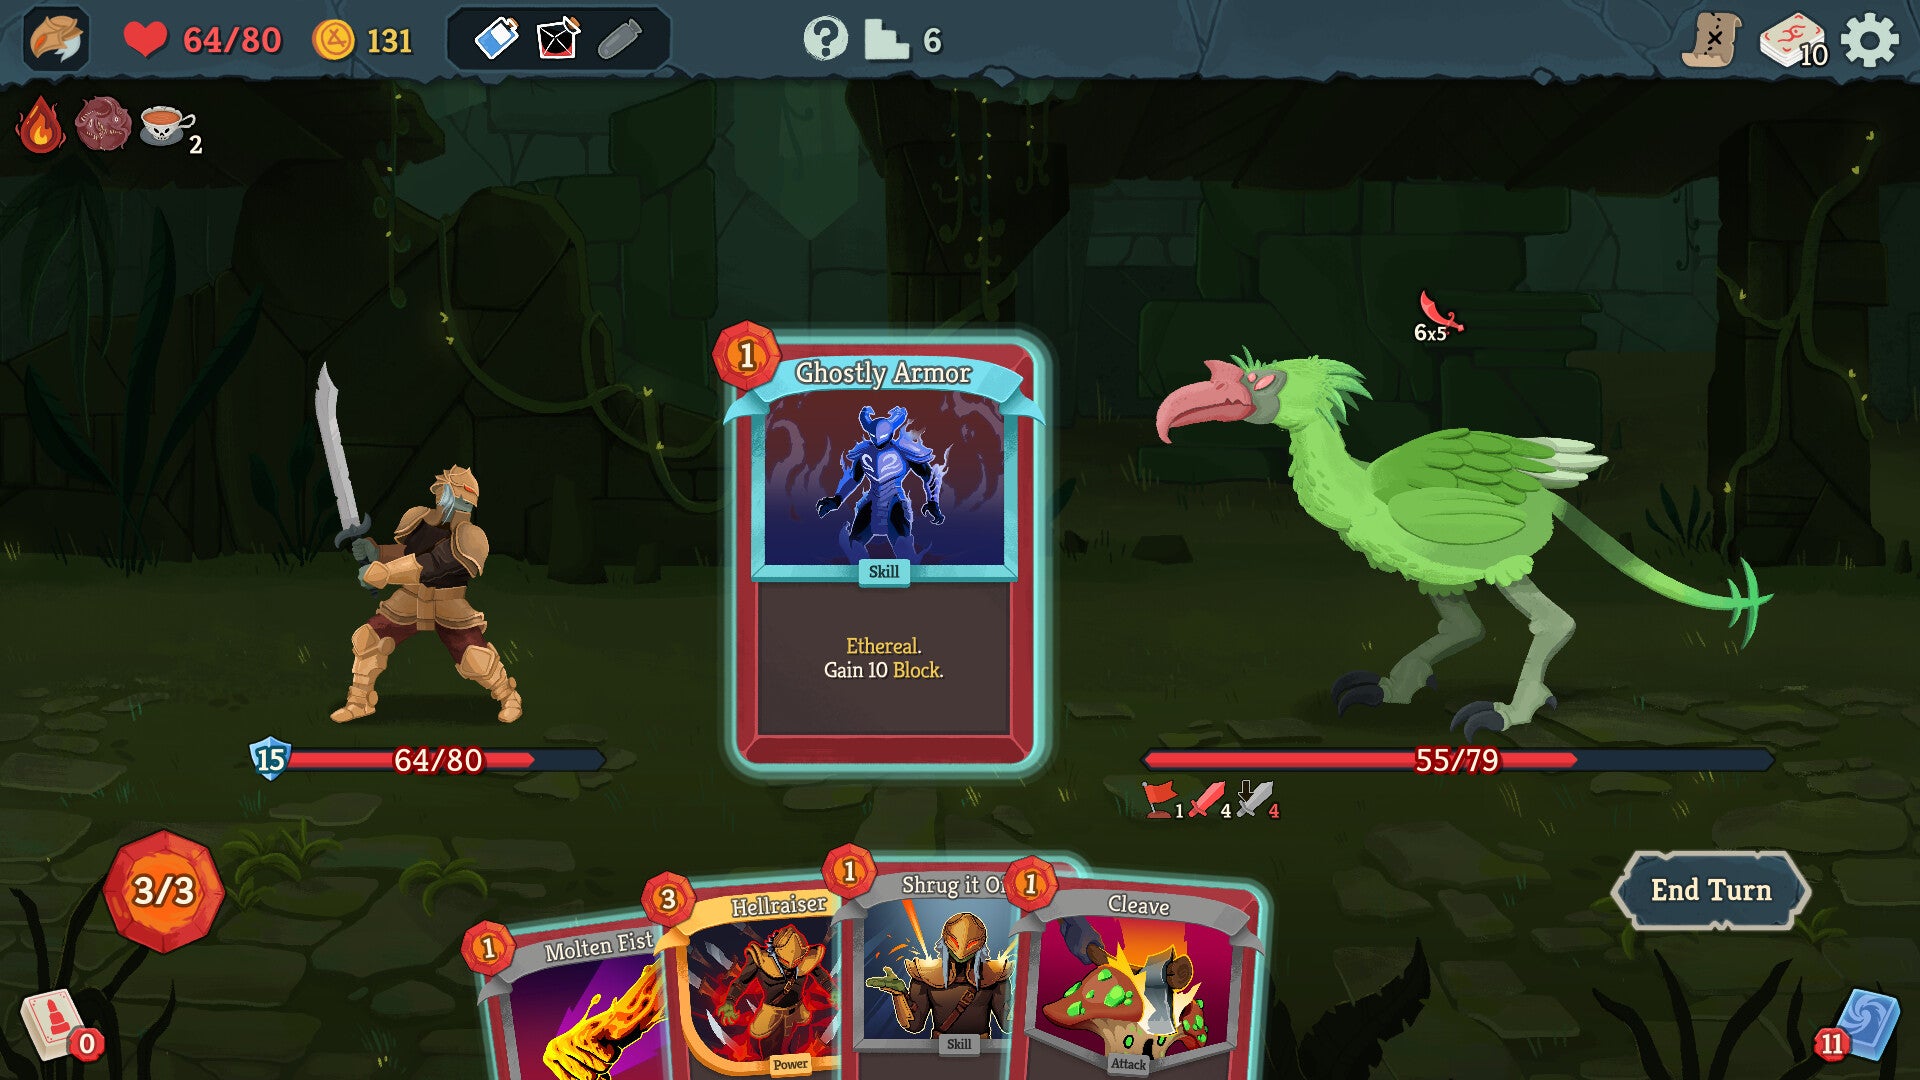 The Ironclad slaying beasts in a Slay The Spire 2 screenshot.